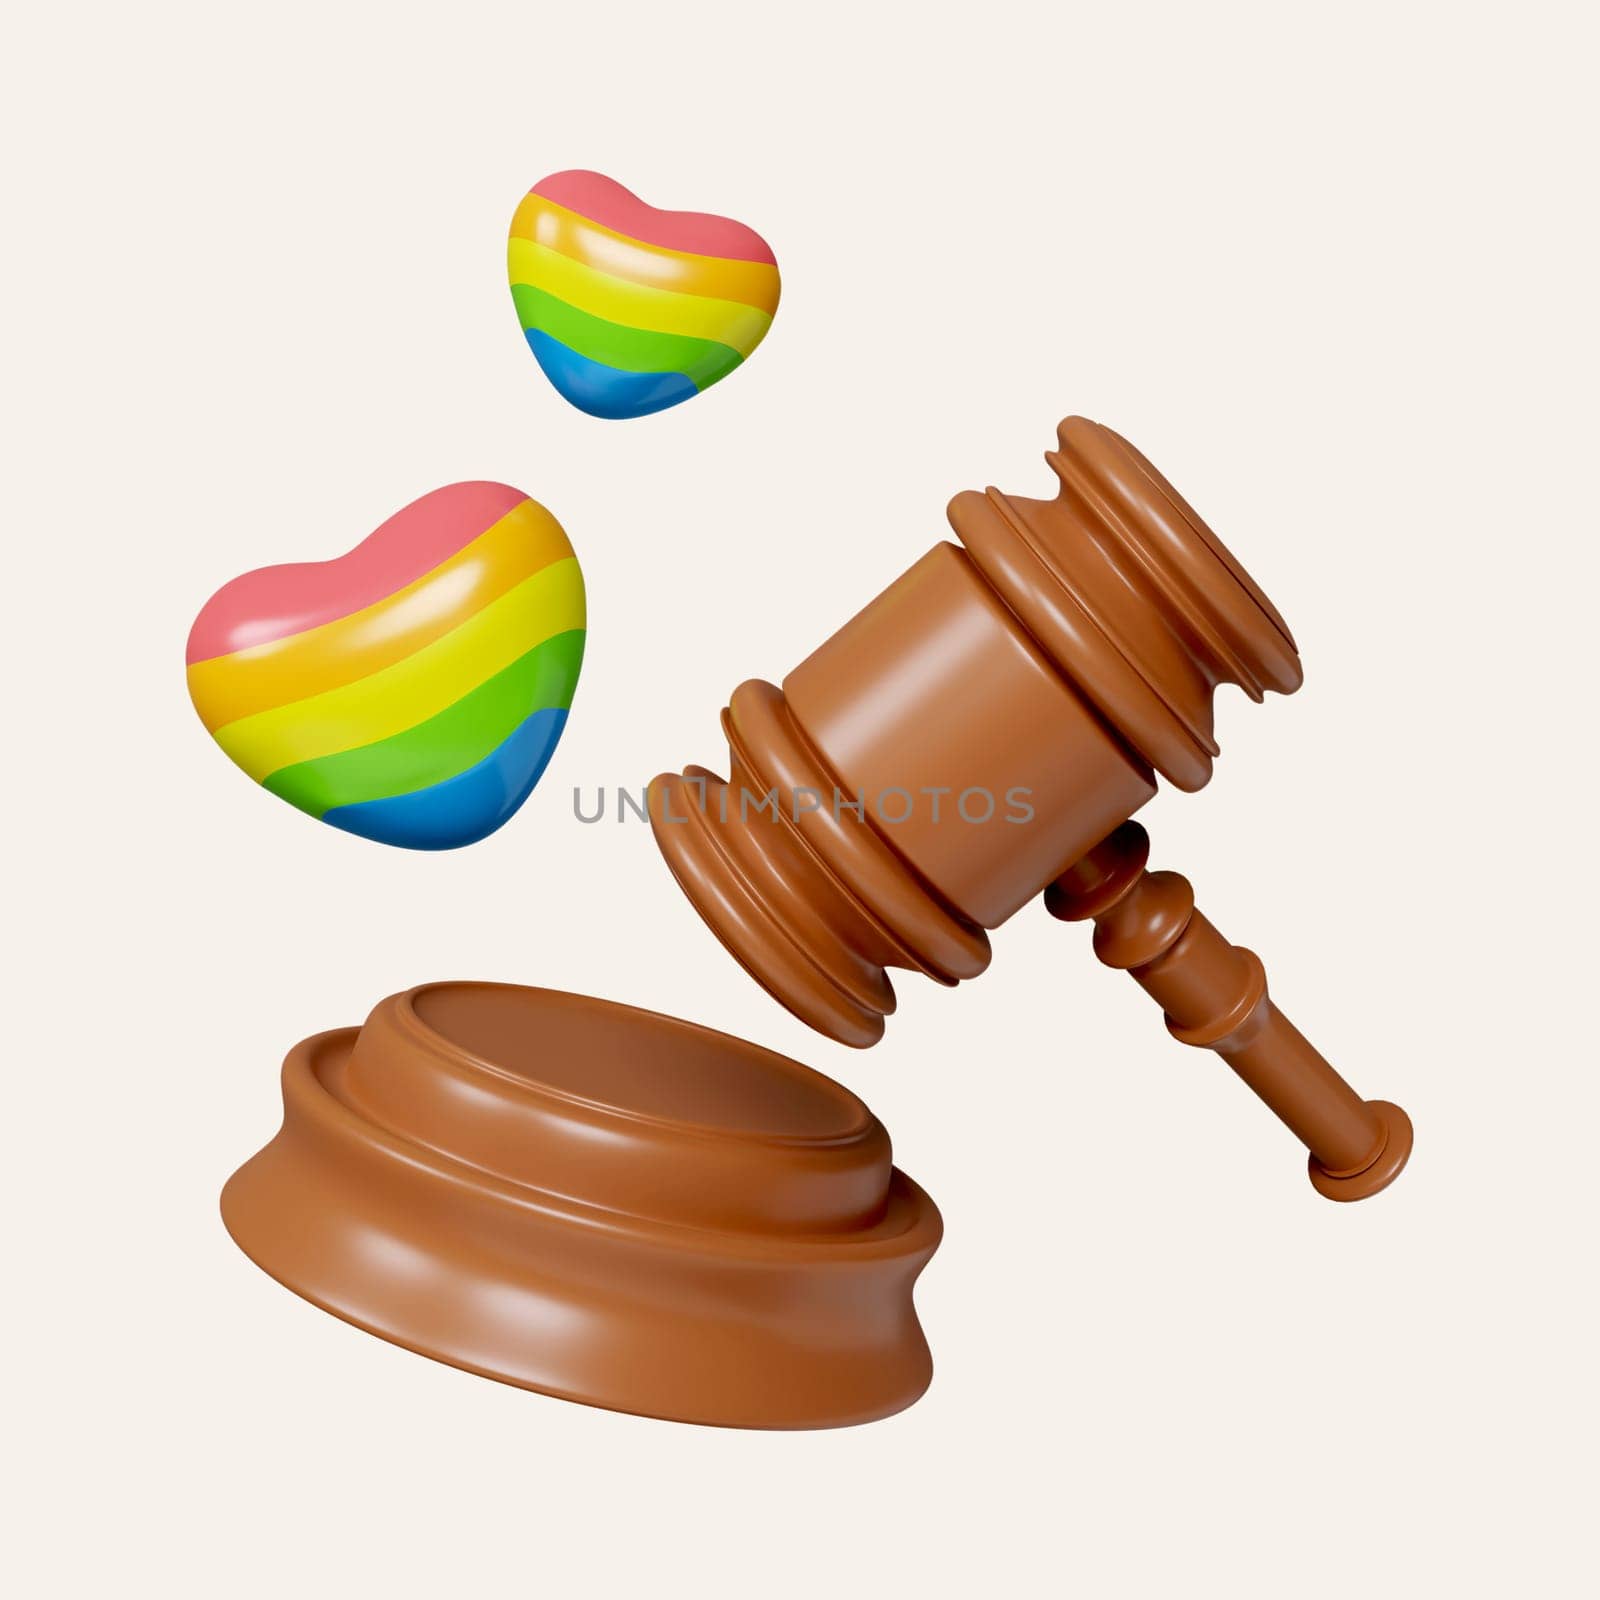 3d Homosexual Rights Concept - Gay Pride Flag Behind Judge's Gavel. icon isolated on white background. 3d rendering illustration. Clipping path. by meepiangraphic